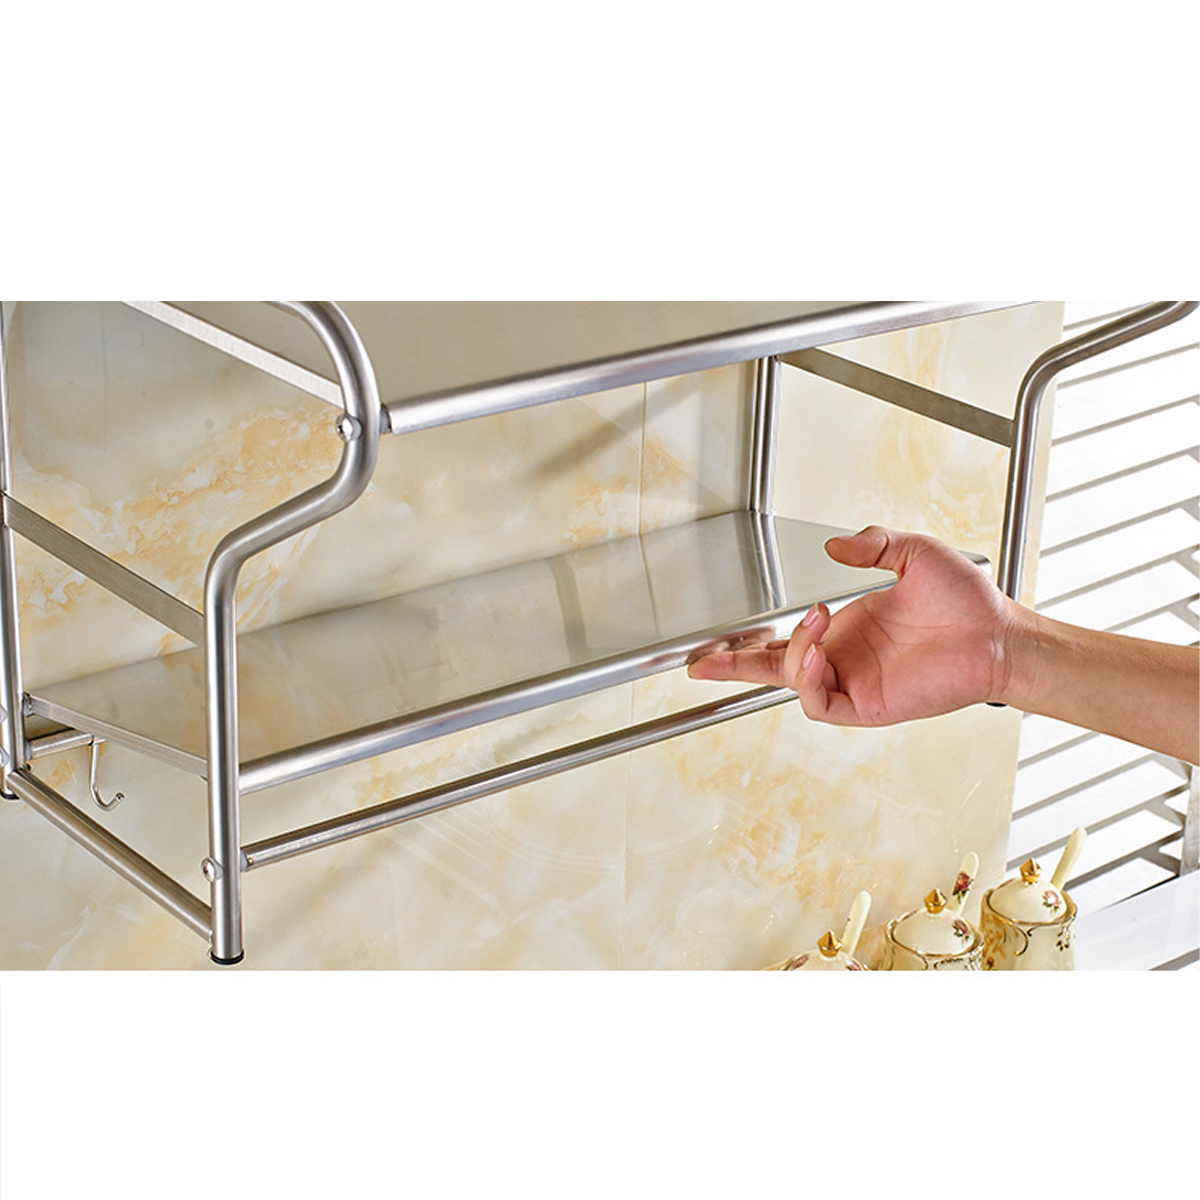 Microwave-Oven-Rack-Kitchen-Stainless-Steel-Wall-Bracket-Shelf-Holder-With-Hooks-1740073